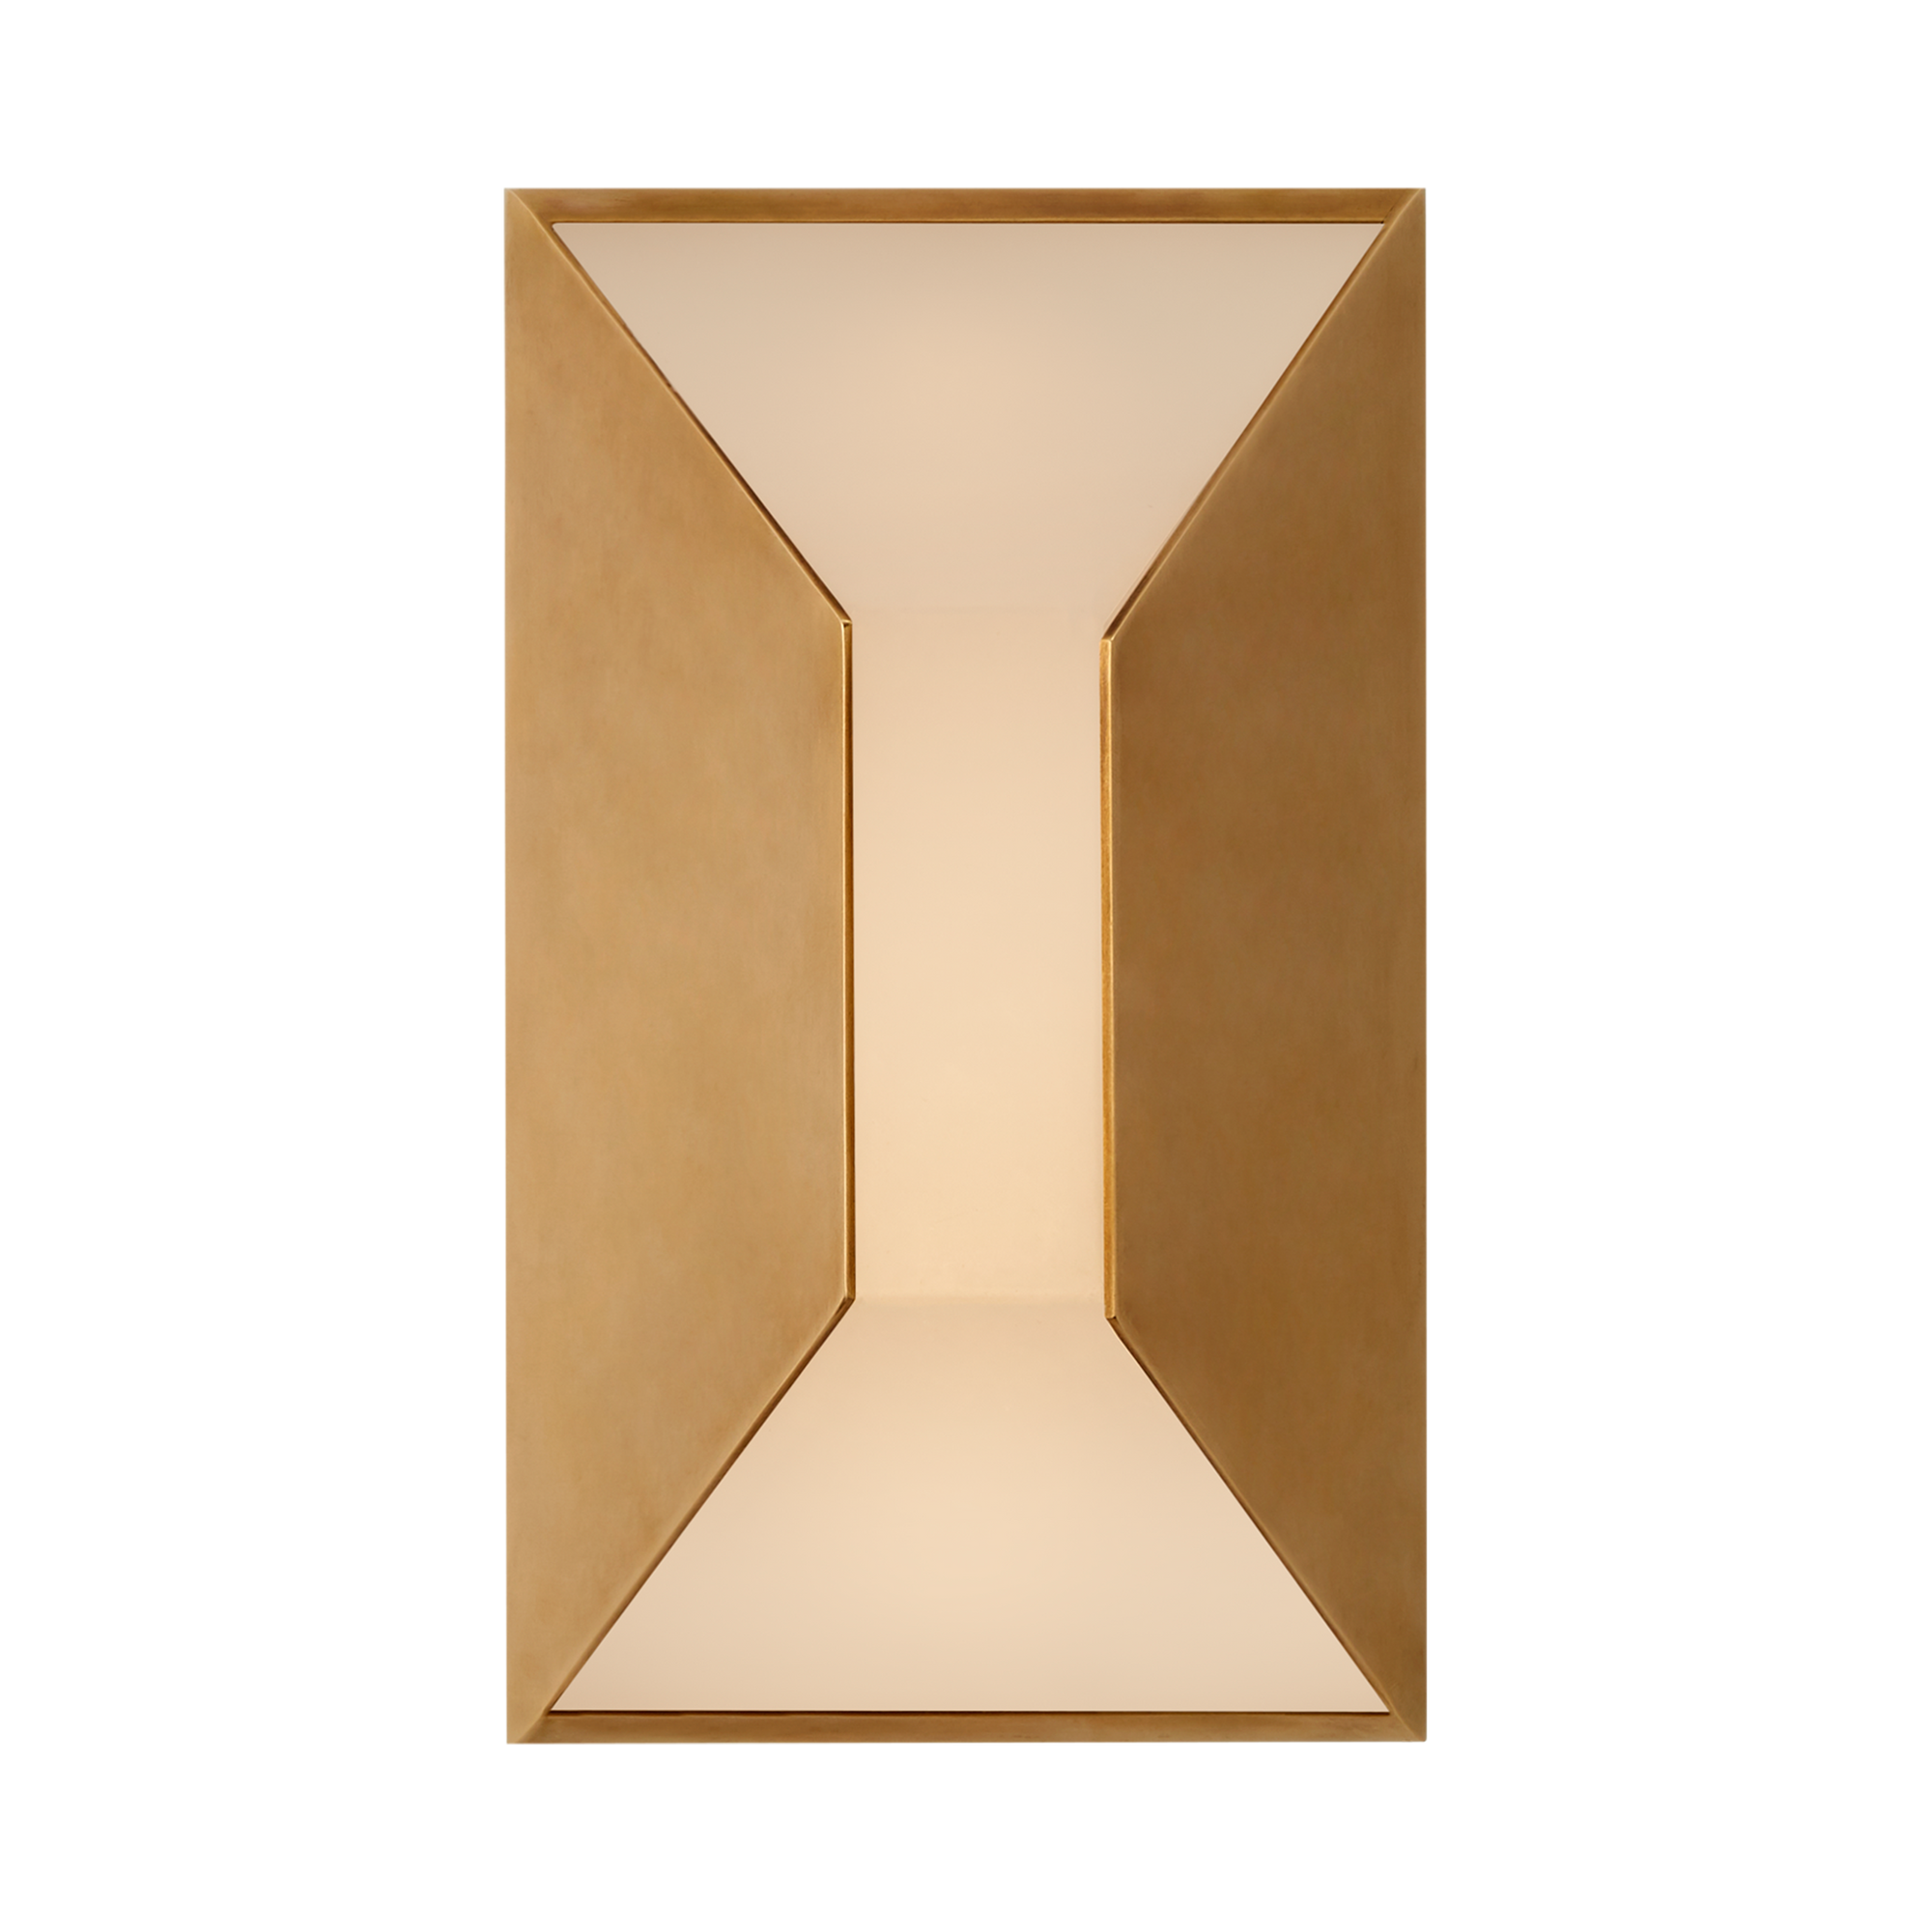 The Stretto Small Wall Light features a distinctive design and soulful vibe.